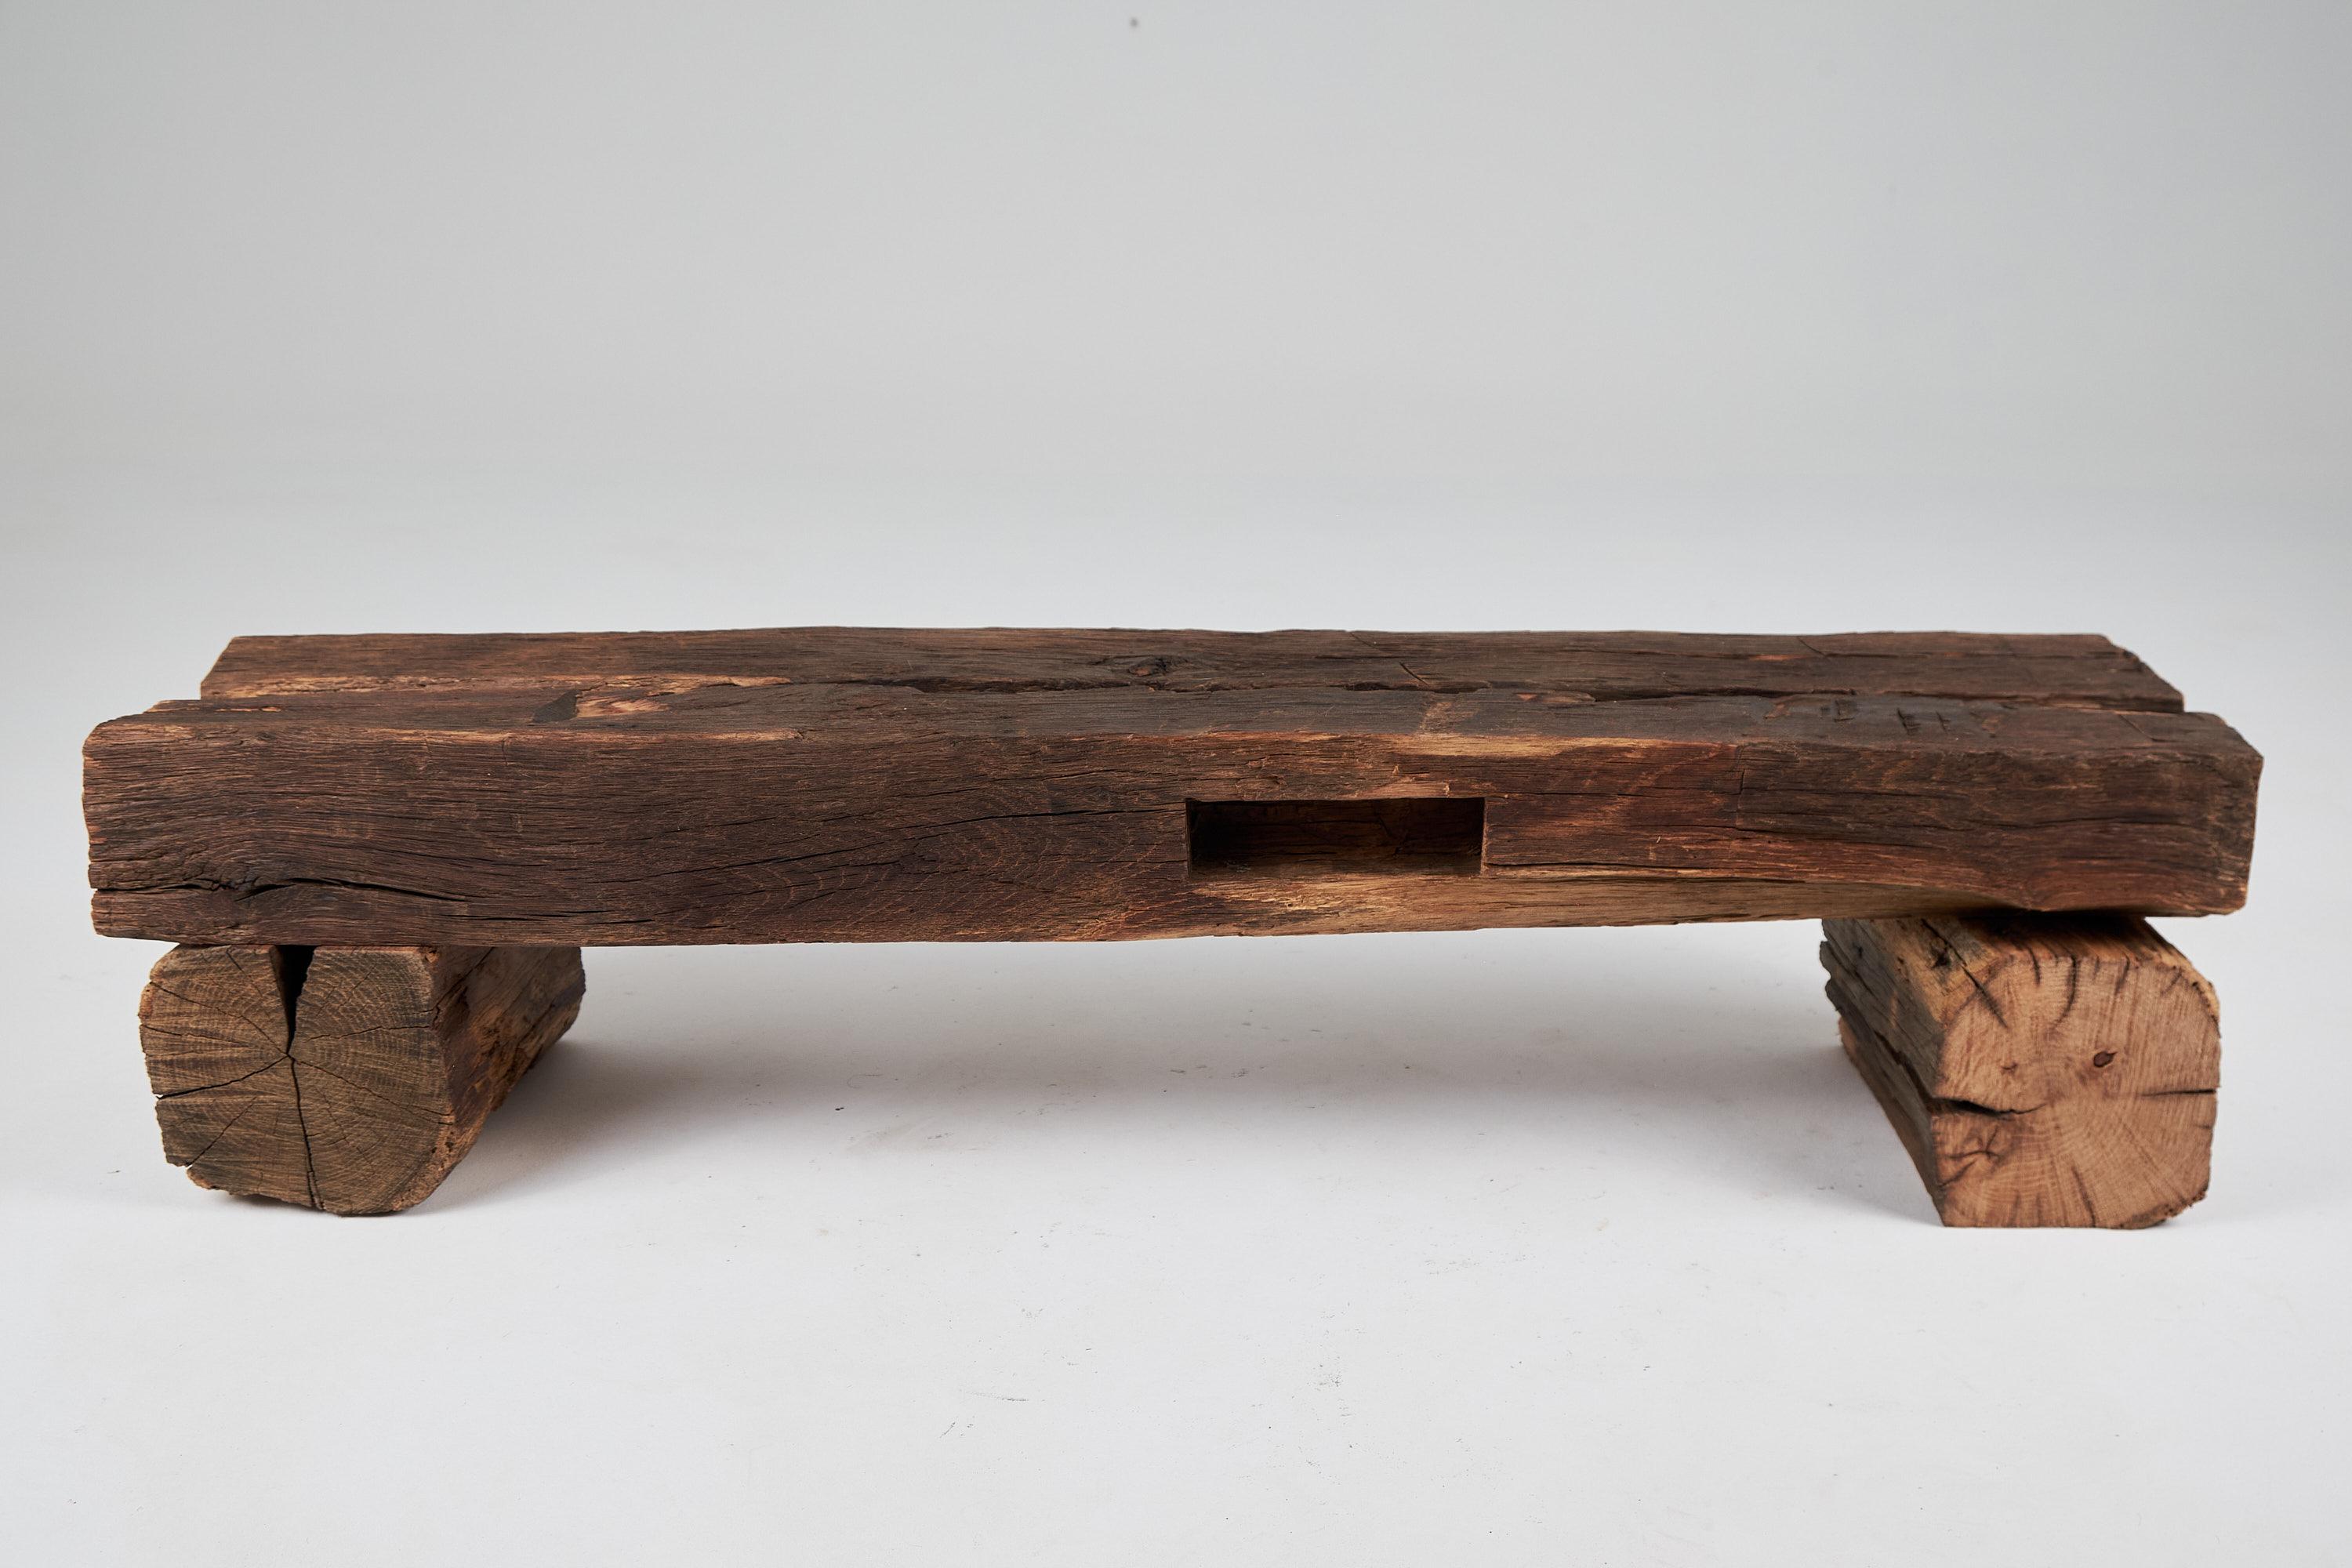 Unique bench with original design by Logniture. Made entirely from old oak beams. Protected with the highest quality oils, ensuring durability for generations. Such unique handmade design will highlight your interior and bring comfort to your home,